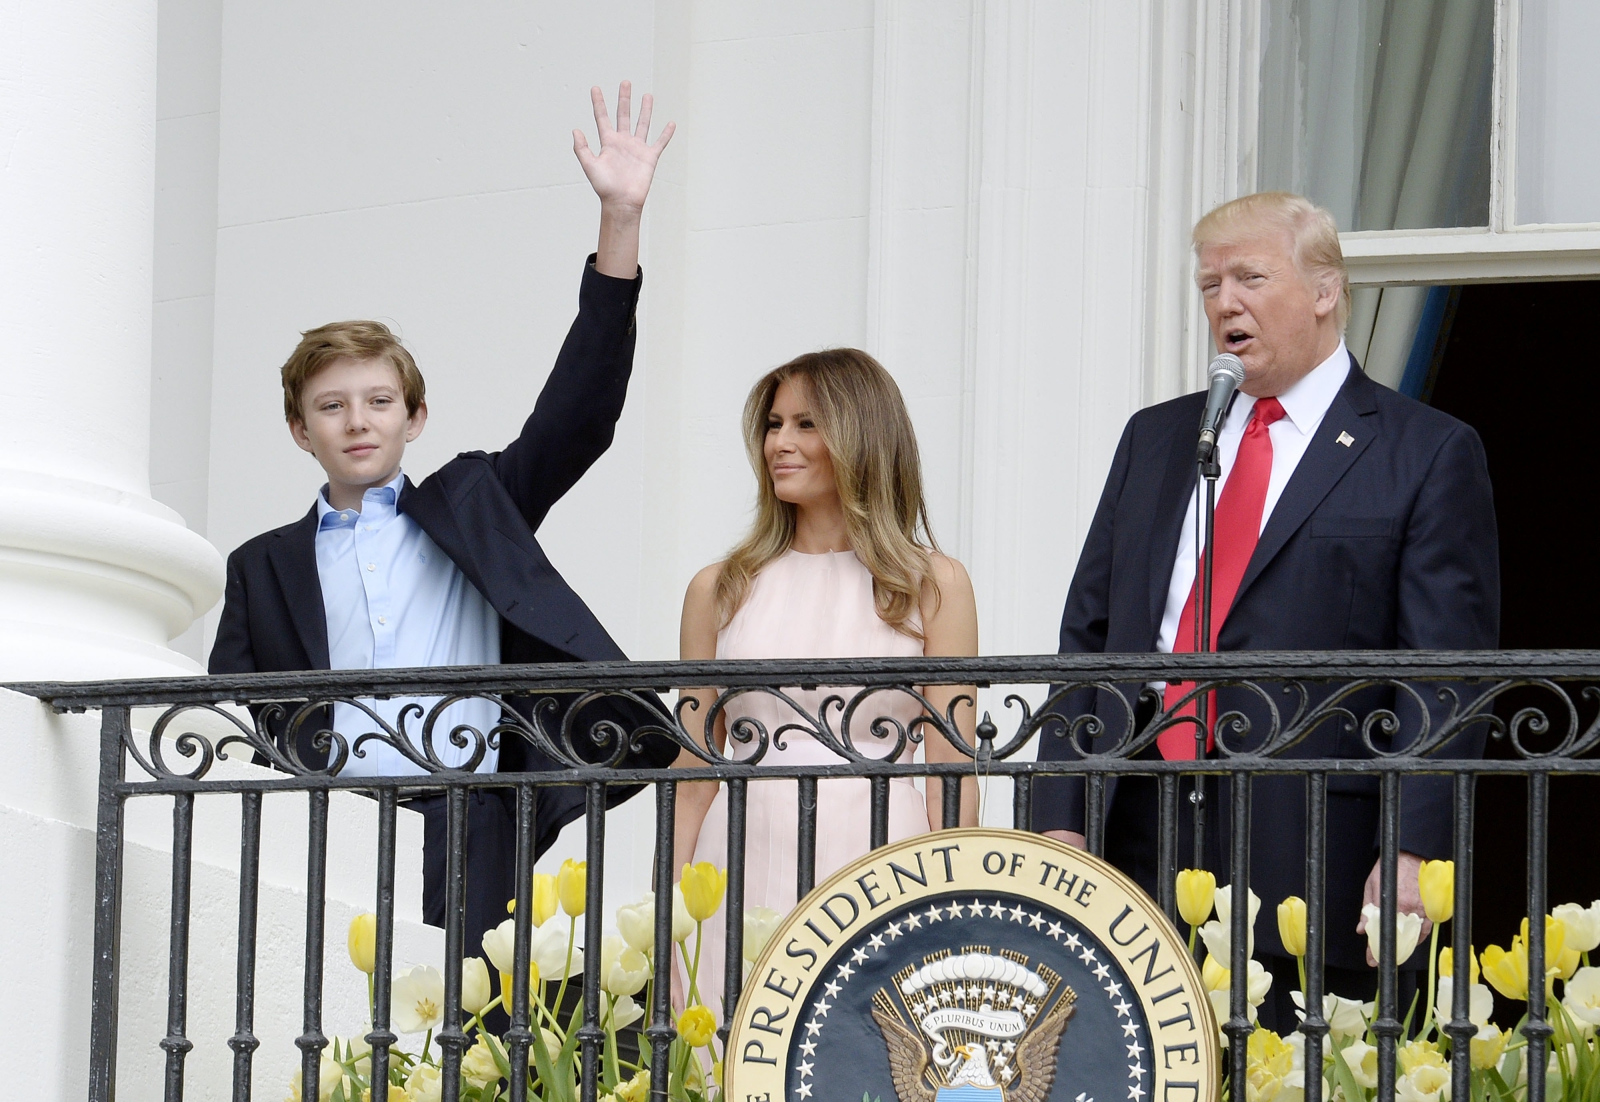 epa05912812 US President Donald J. Trump , First Lady Melania Trump and son Barron Trump attend the annual Easter Egg Roll on the South Lawn of the White House in Washington, DC, USA, 17 April 2017.  EPA/OLIVIER DOULIERY / SIPA POOL 
Dostawca: PAP/EPA.